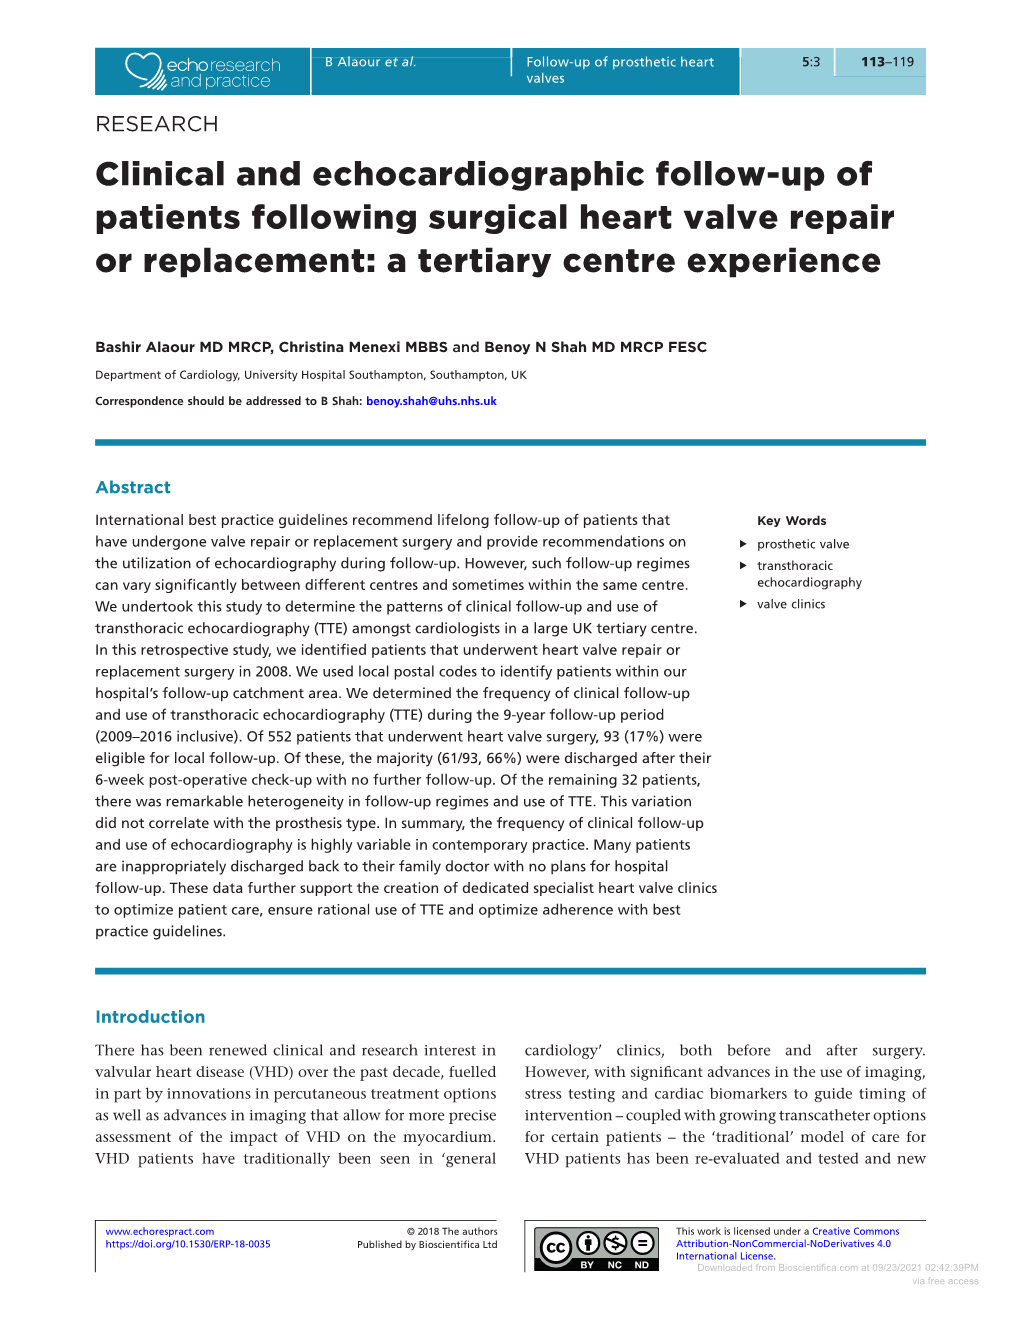 Clinical and Echocardiographic Follow-Up of Patients Following Surgical Heart Valve Repair Or Replacement: a Tertiary Centre Experience